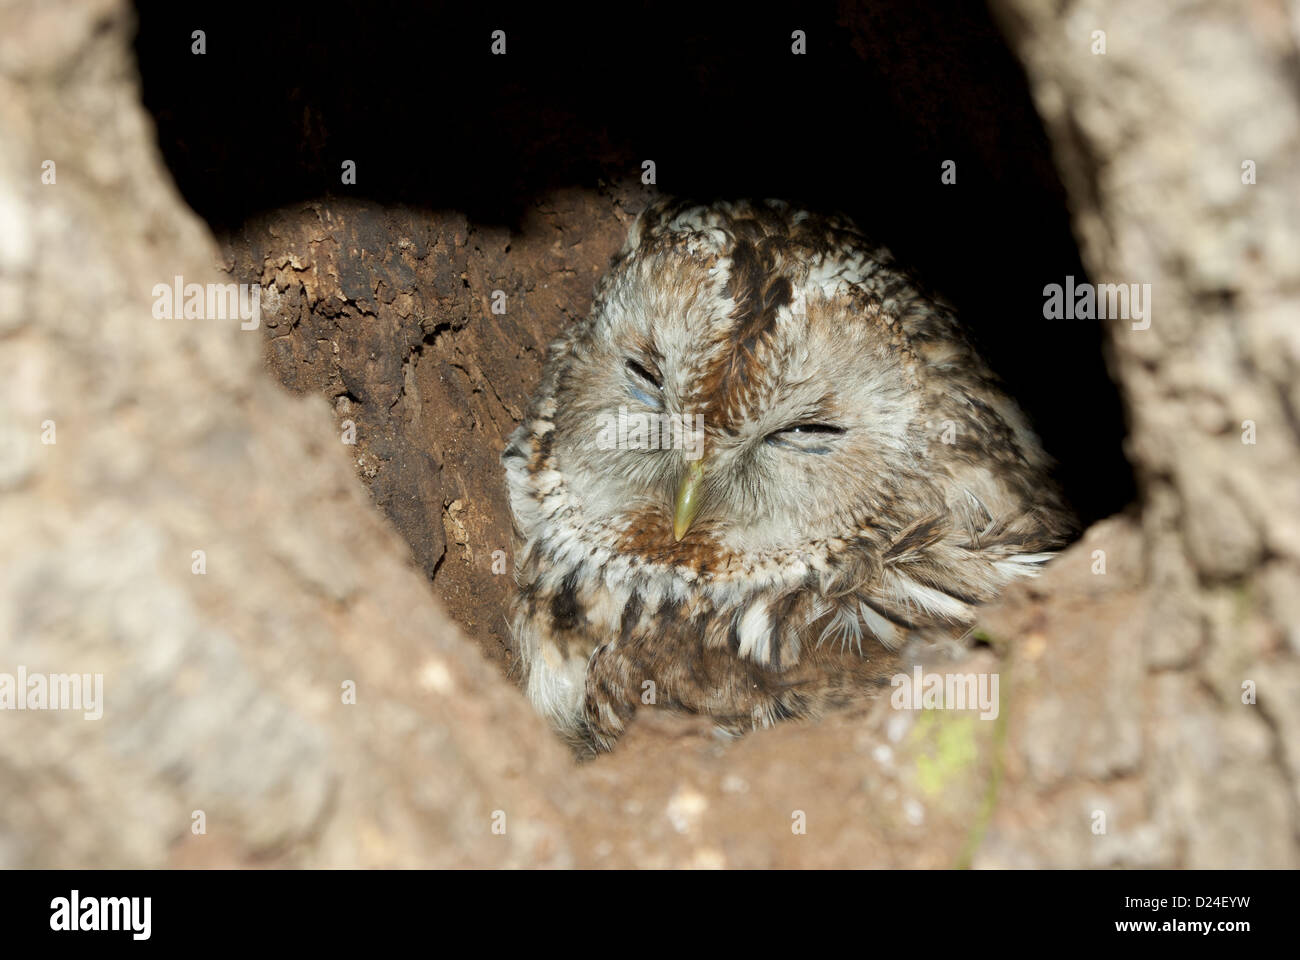 Grey Owl sitting in a nest in the hollow. Stock Photo